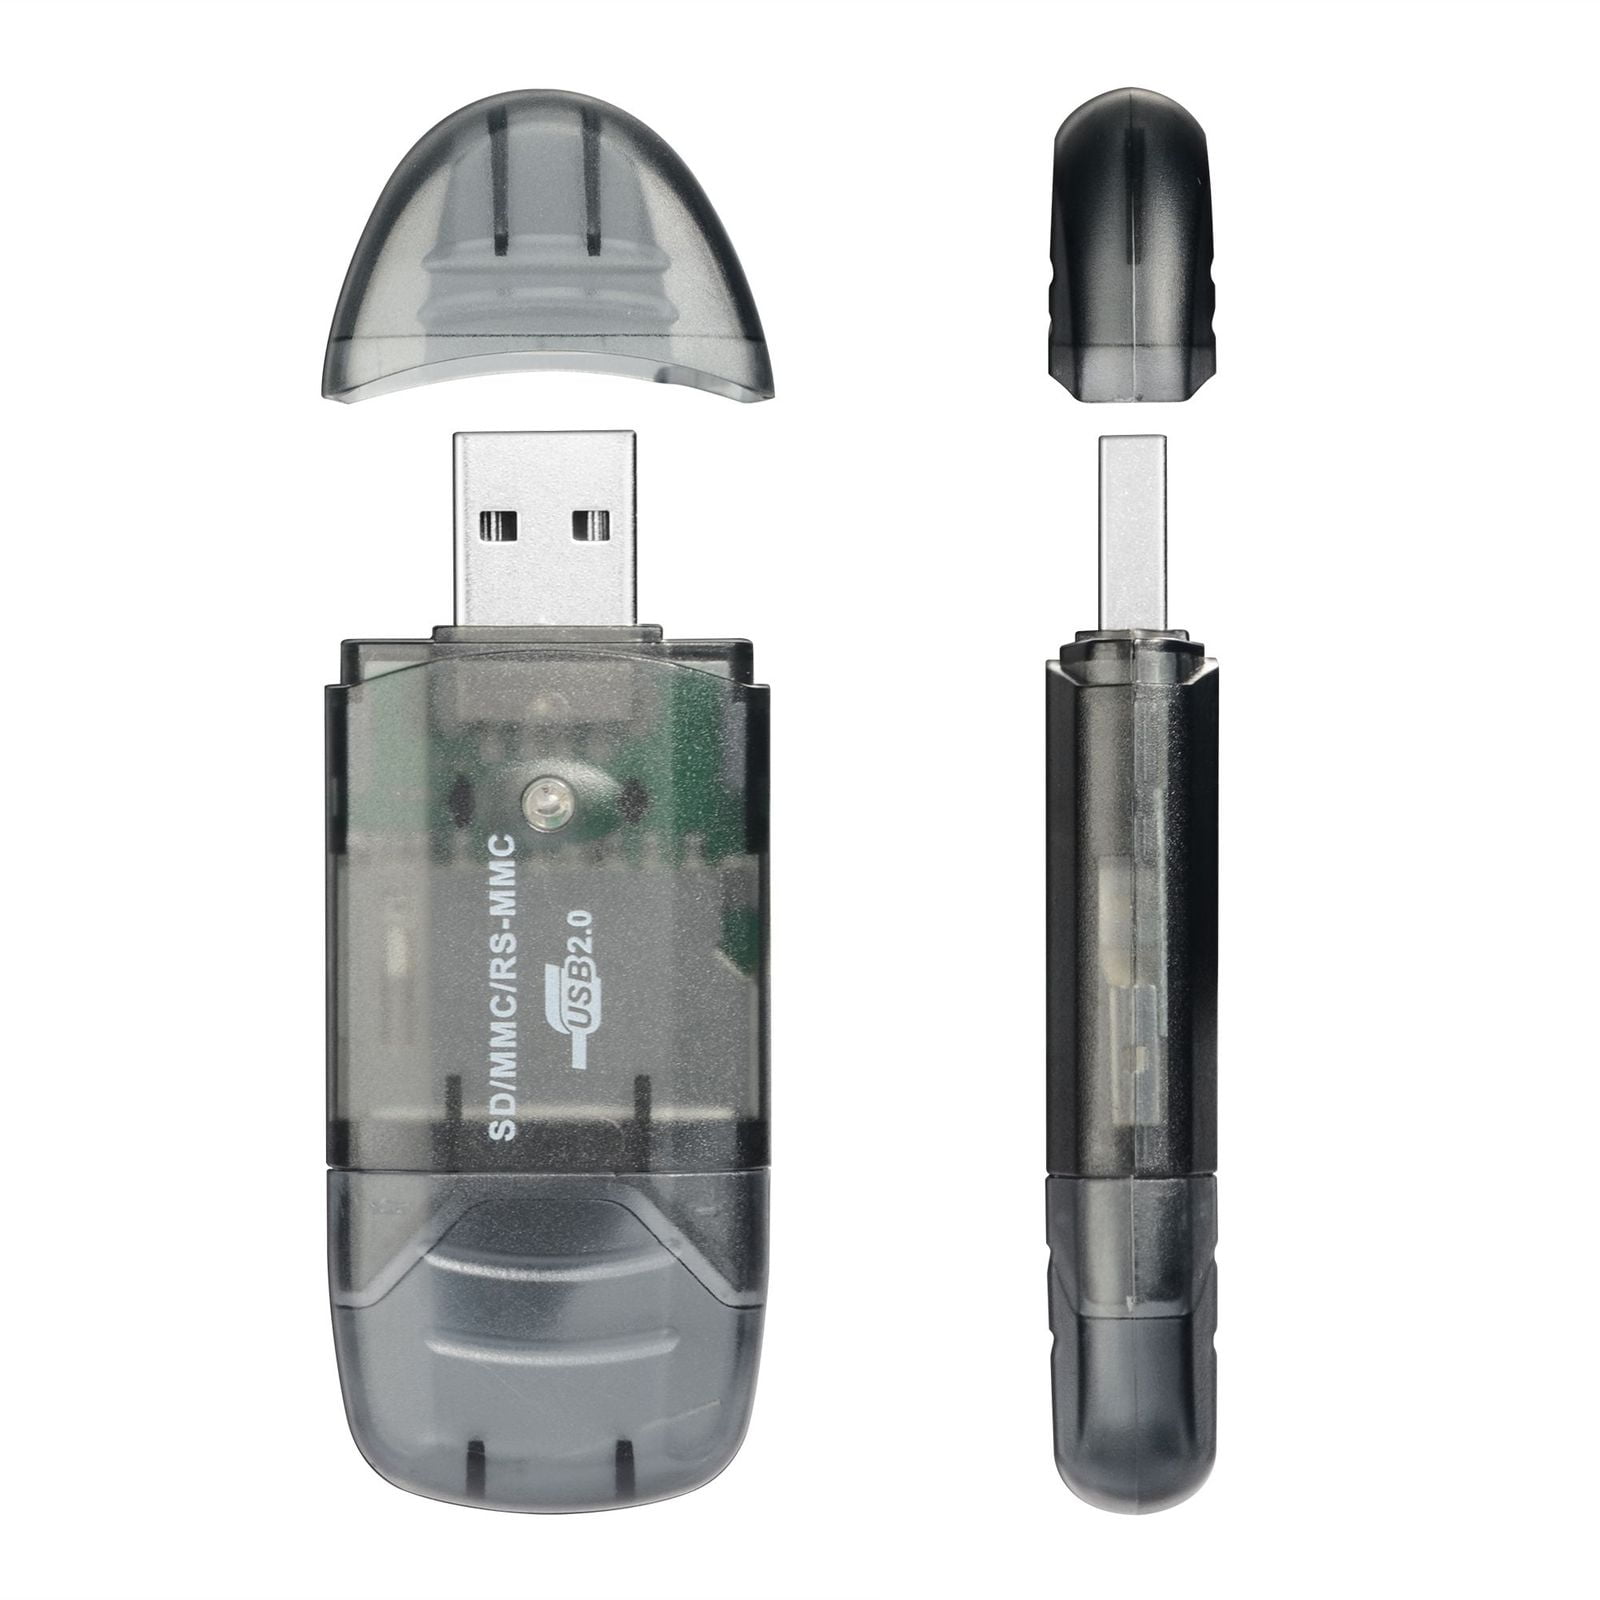 TAKE FILES WITH YOU KEY CHAIN 2GB SD Card mounted in a USB2 DRIVE ADAPTER 